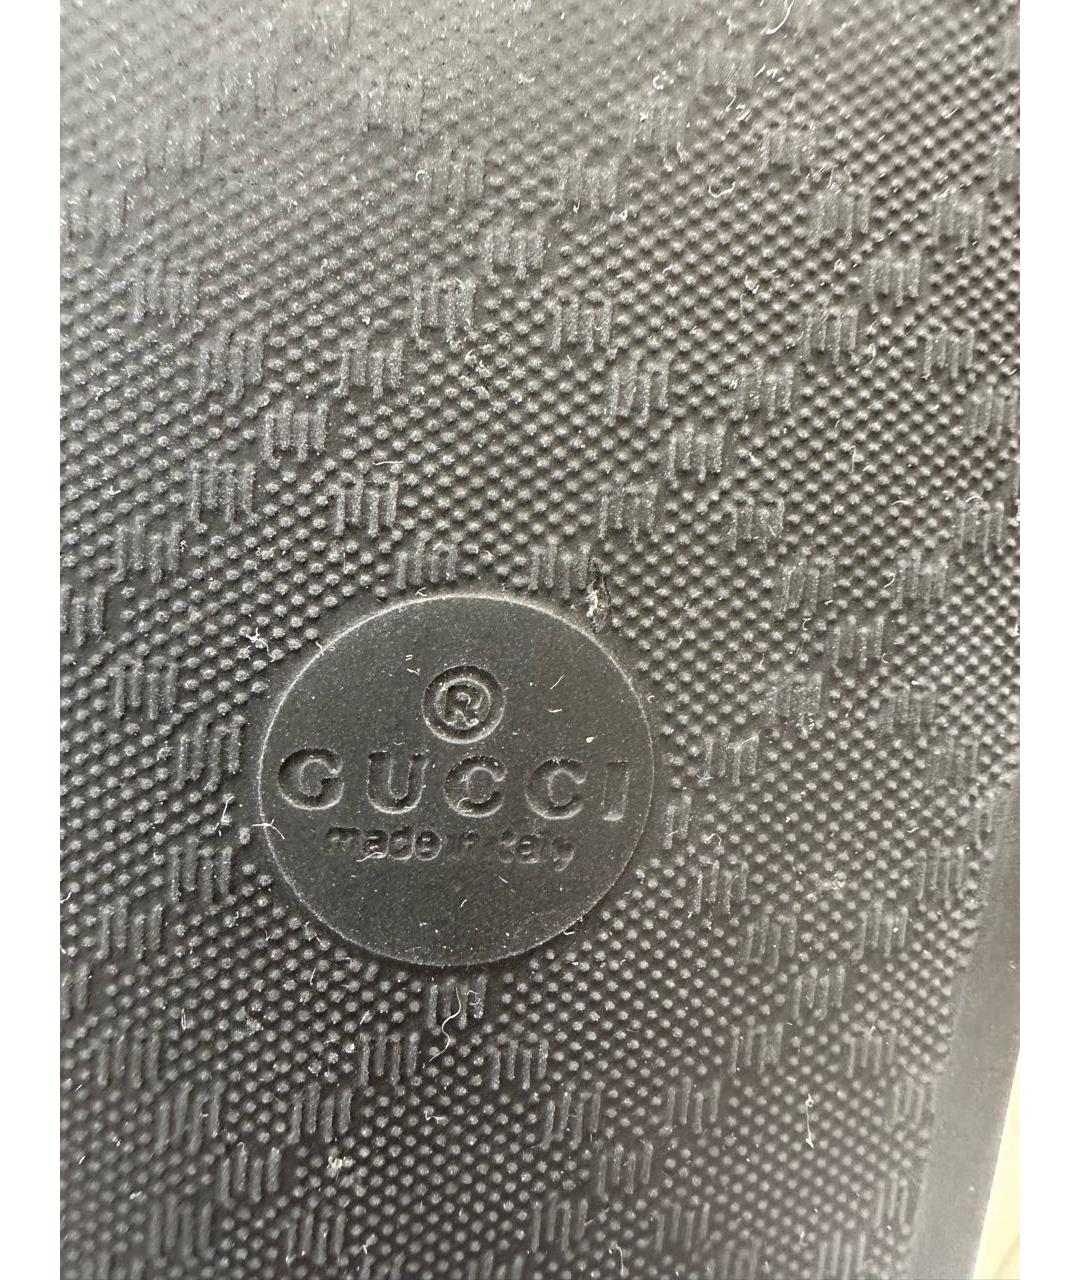 GUCCI Мульти шлепанцы, фото 6